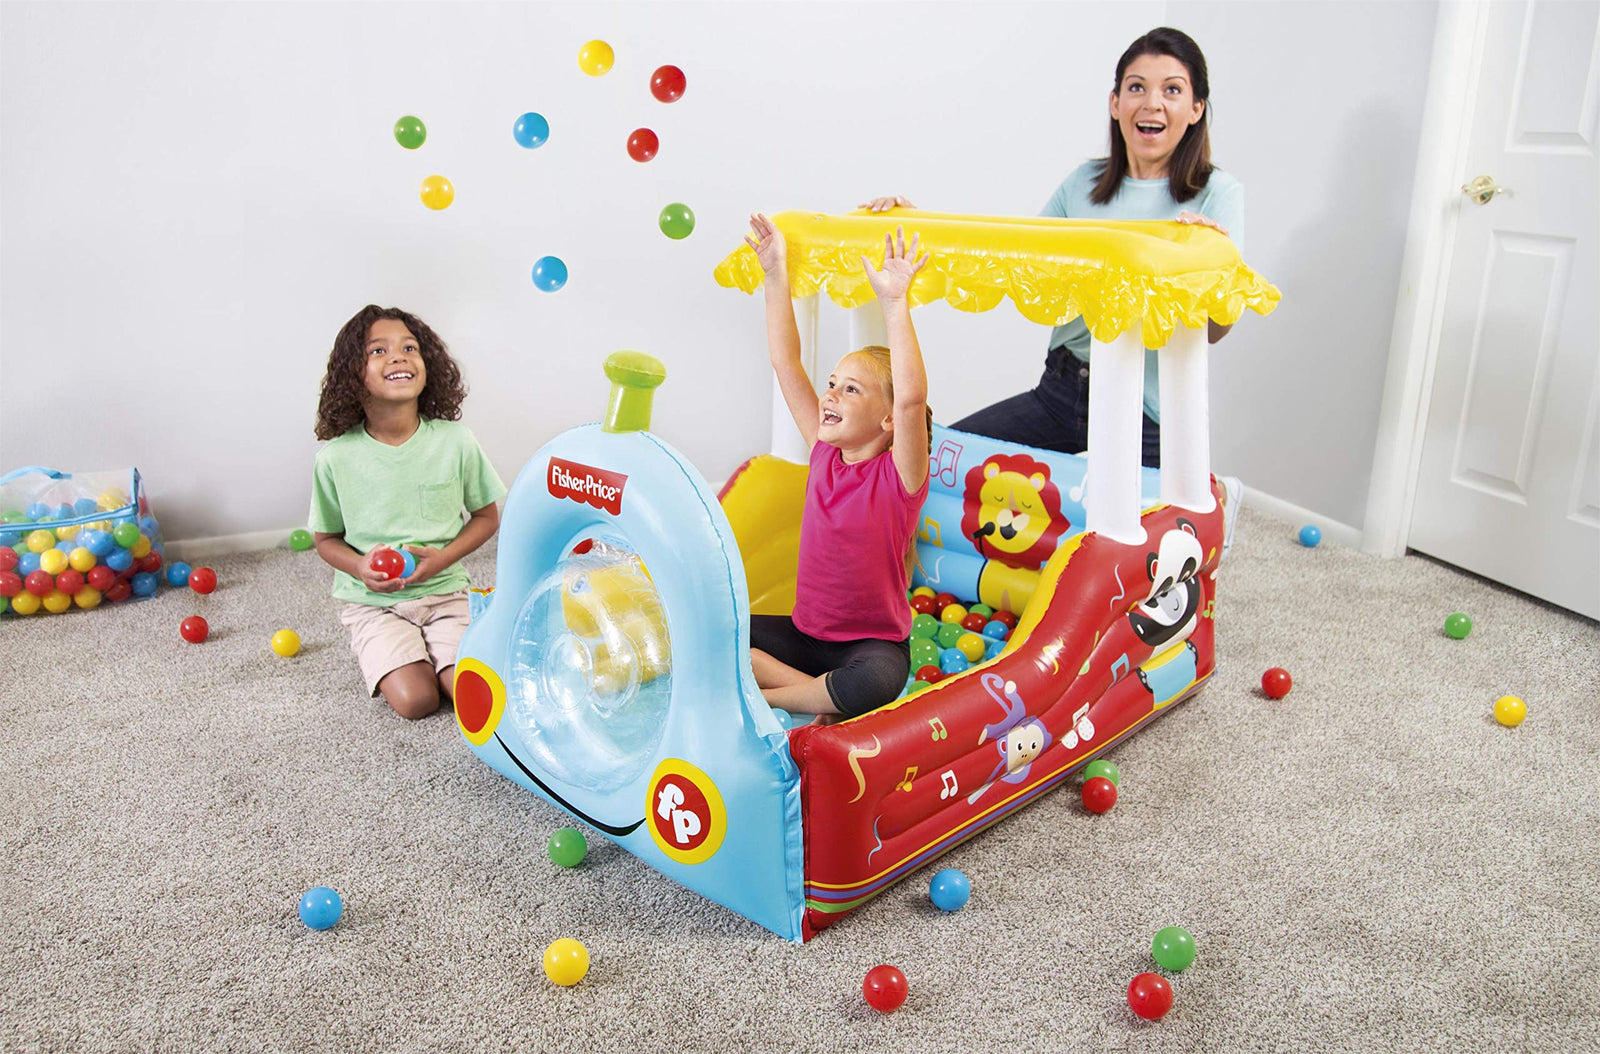 Bestway Fisher-Price Inflatable Ball Pit | Fun Train Theme | Indoor & Outdoor Play for Kids